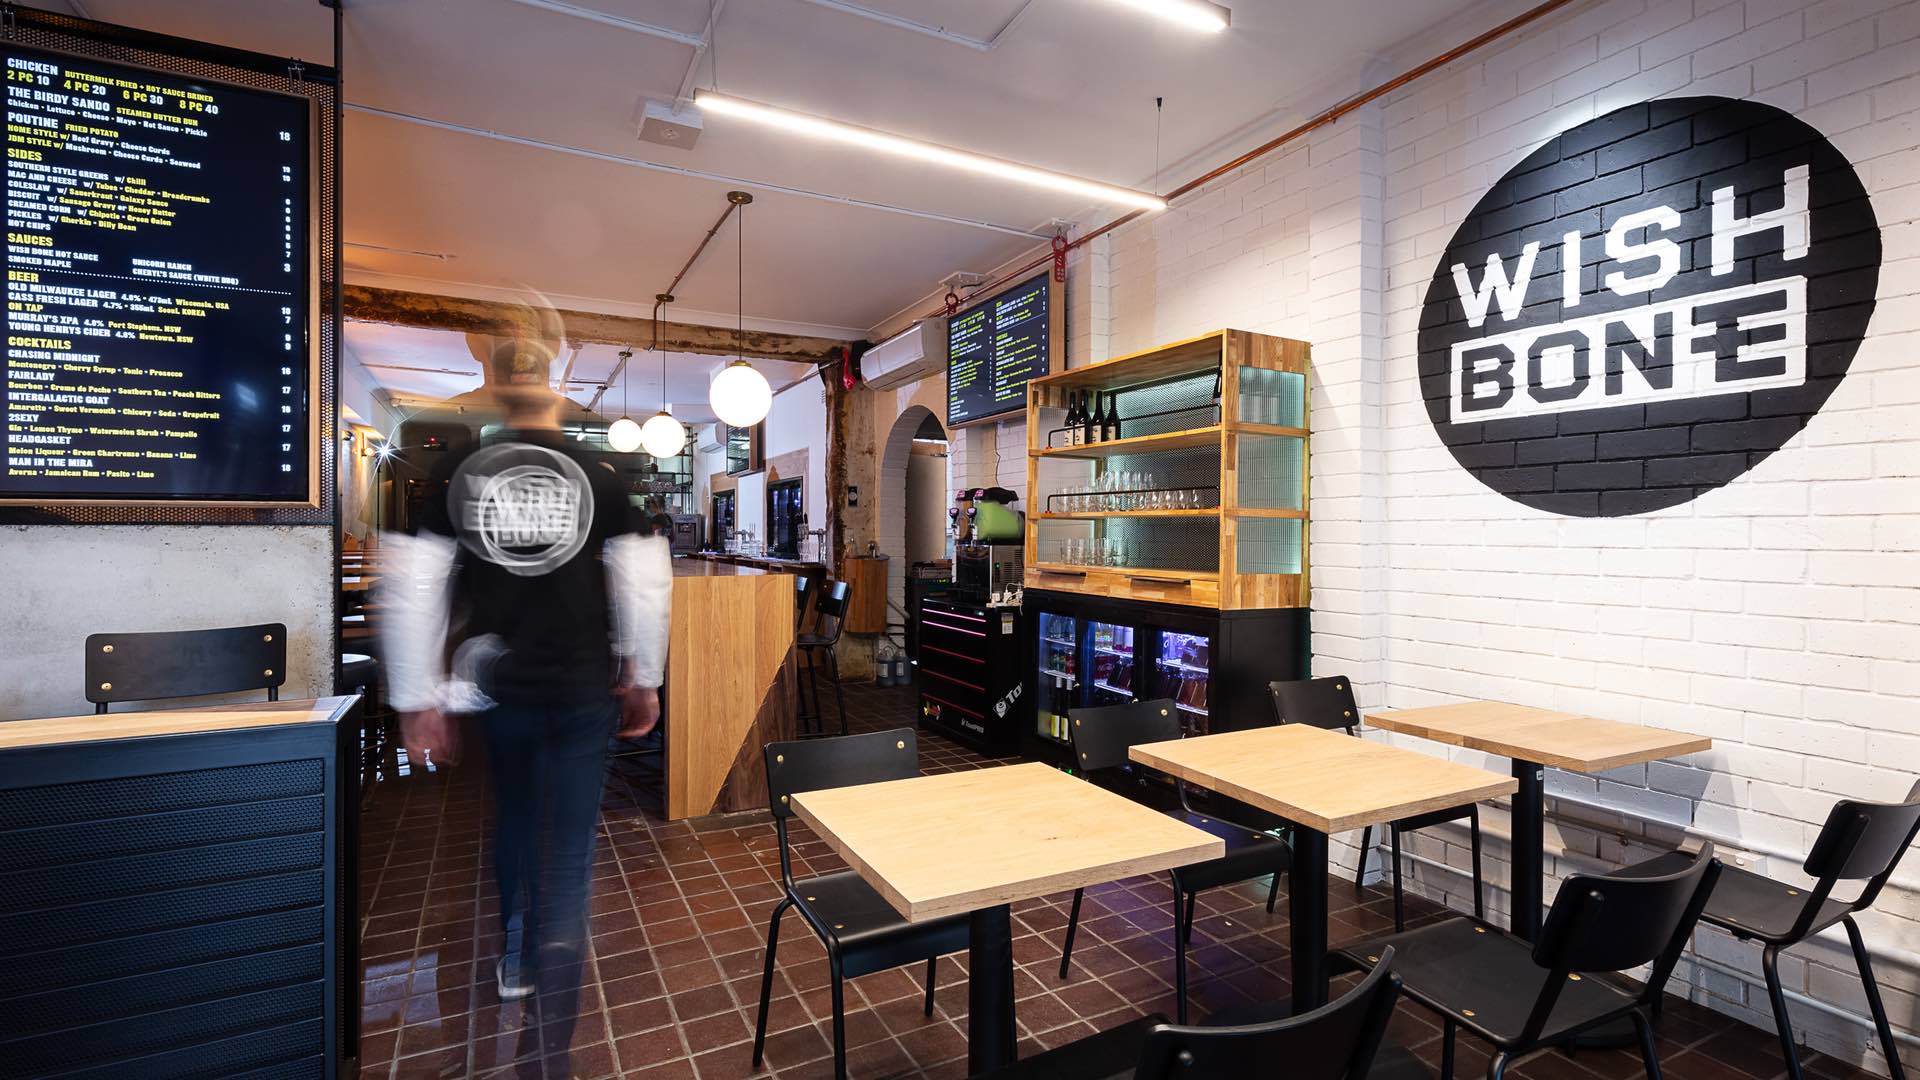 Enmore's The Gretz Has Become Wish Bone, an Eatery Dedicated to Fried Chicken